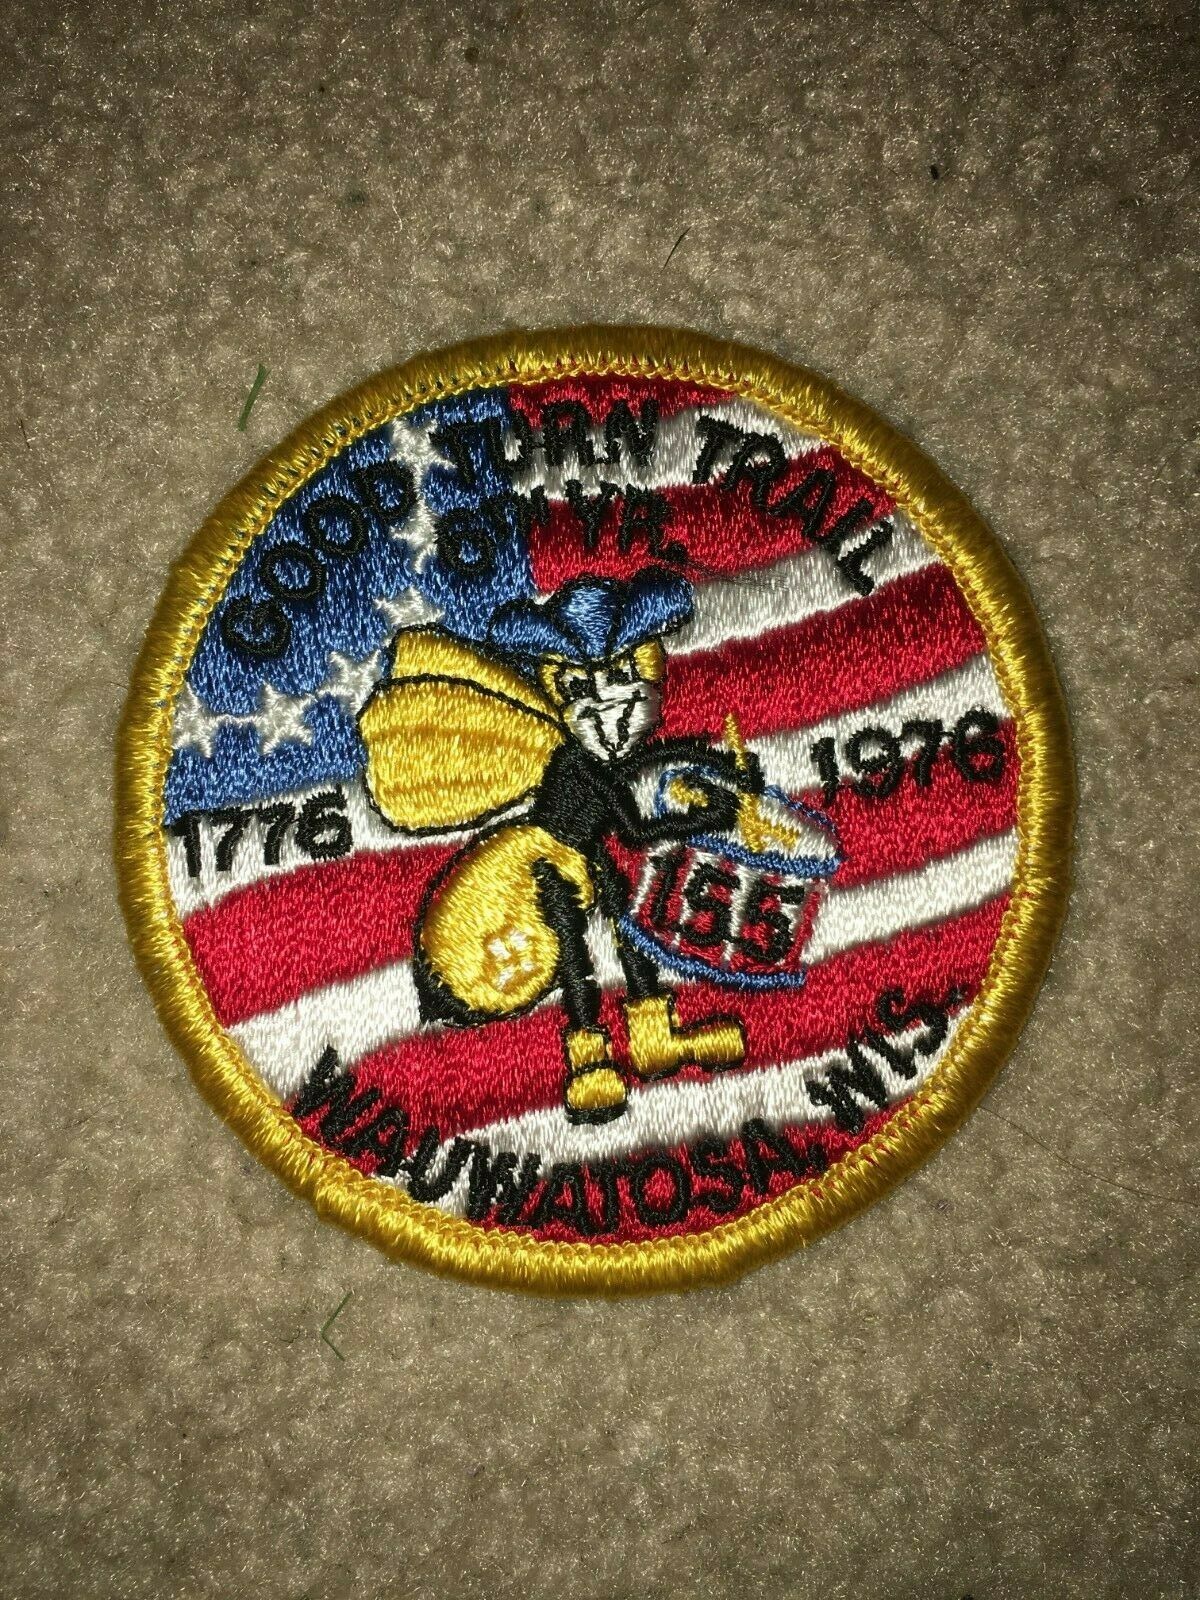 Boy Scout Bsa 6th 1976 Good Turn Wauwatosa Wisconsin Troop 155 Bee Trail Patch